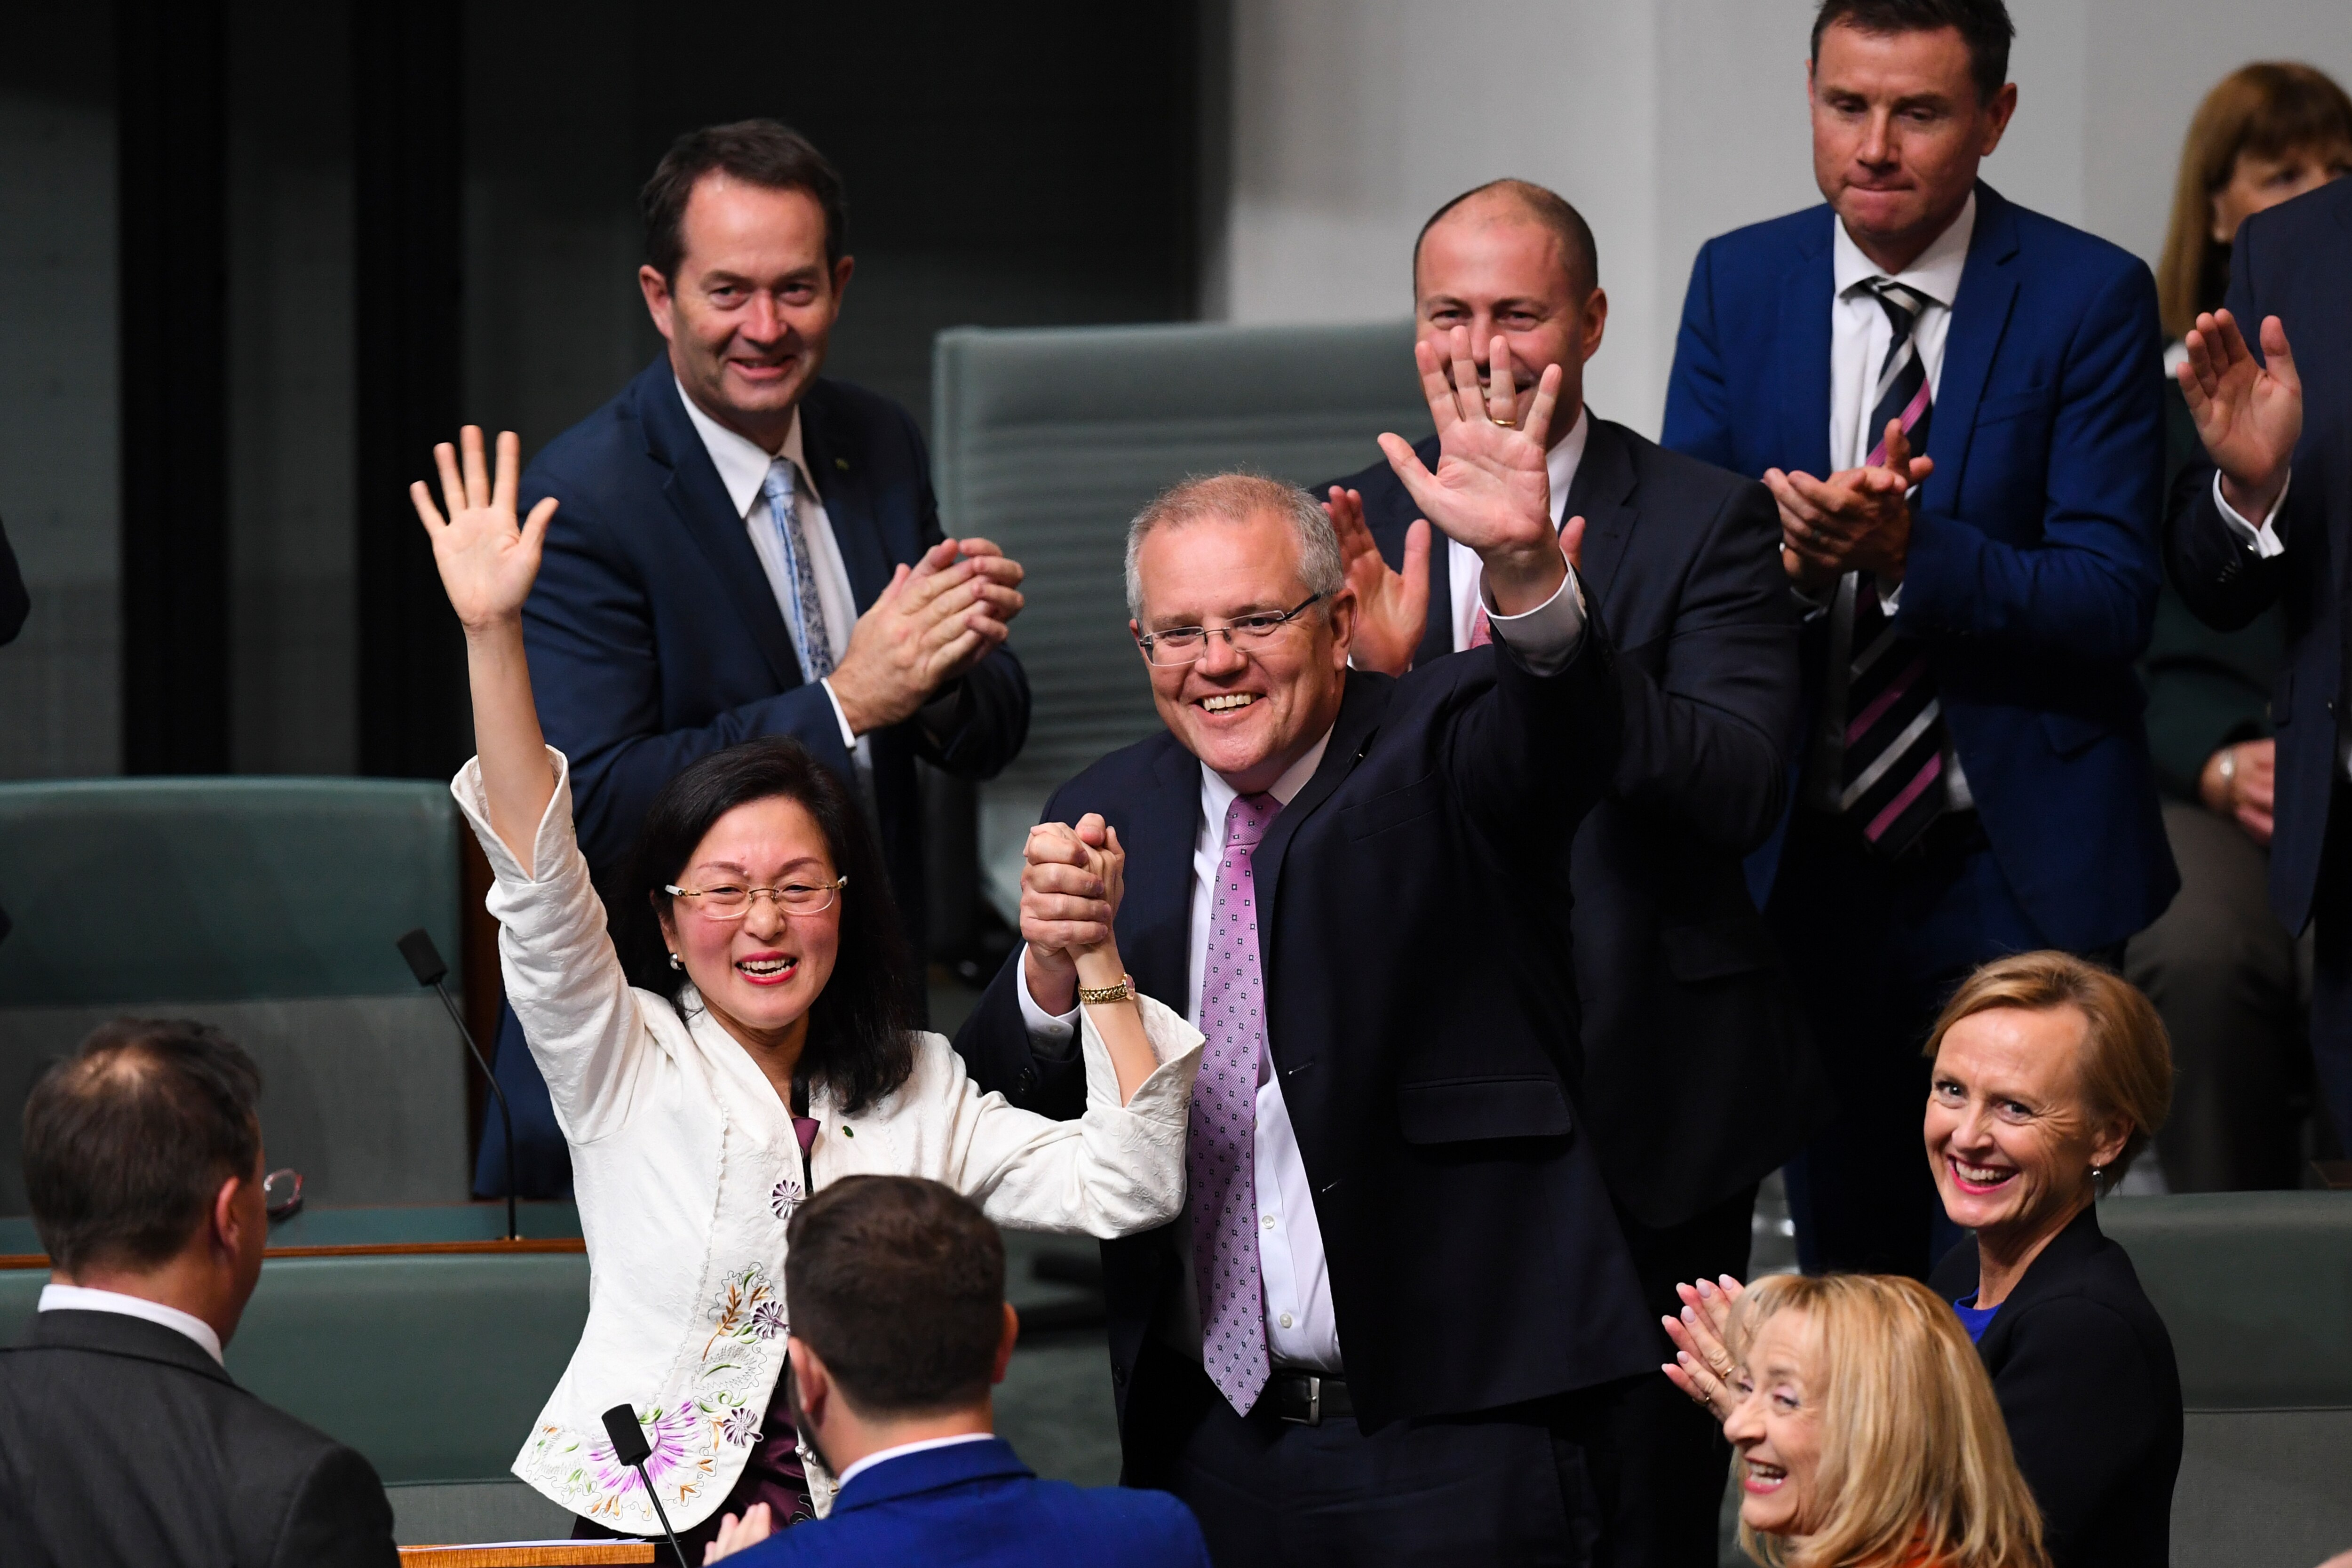 The Member for Chisholm Gladys Liu is congratulated by Australian Prime Minister Scott Morrison after delivering her maiden speech in the House of Representatives at Parliament House in Canberra, Tuesday, 23 July, 2019. (AAP Image/Lukas Coch) NO ARCHIVING